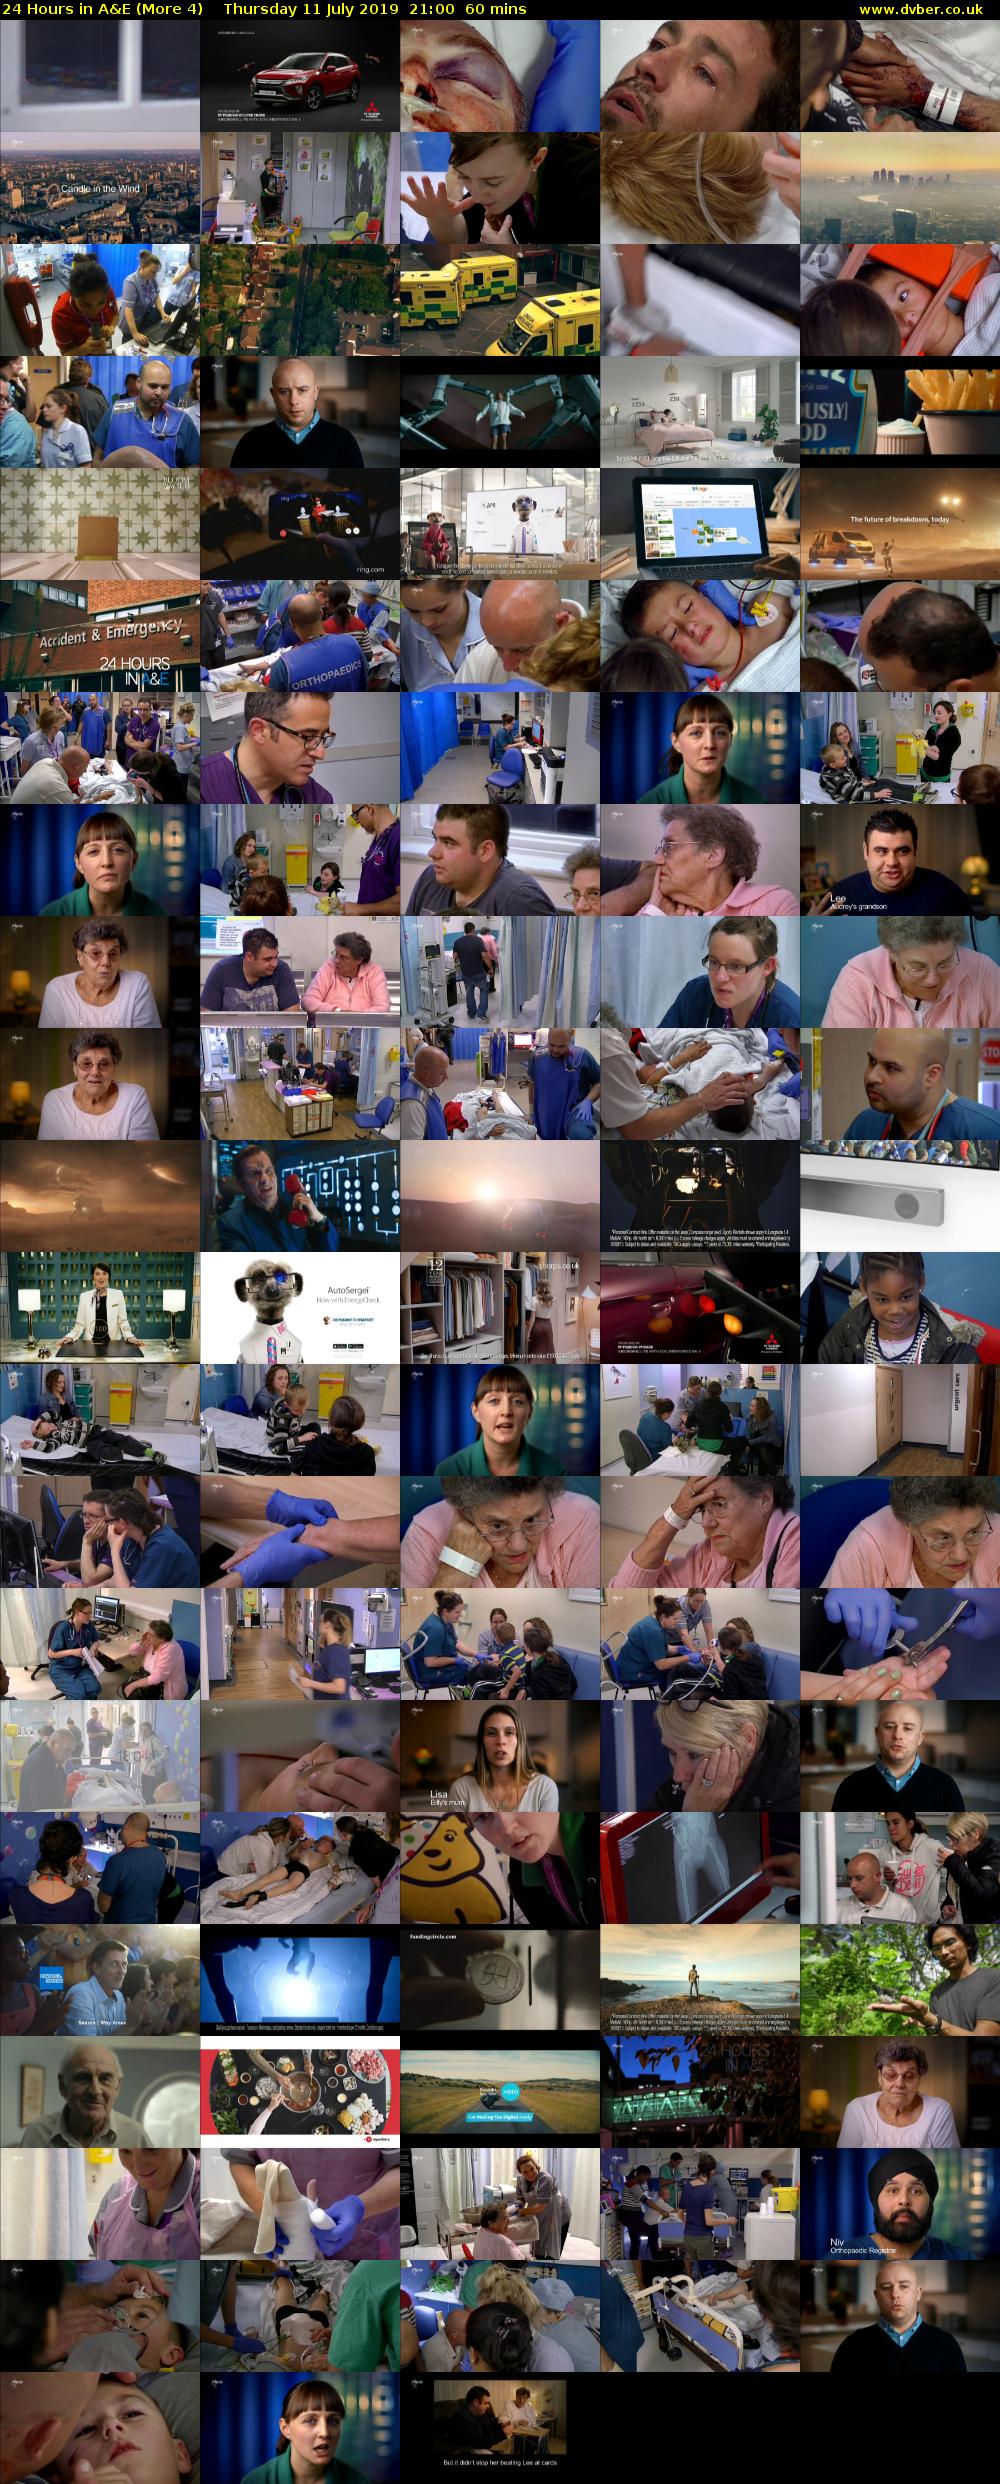 24 Hours in A&E (More 4) Thursday 11 July 2019 21:00 - 22:00